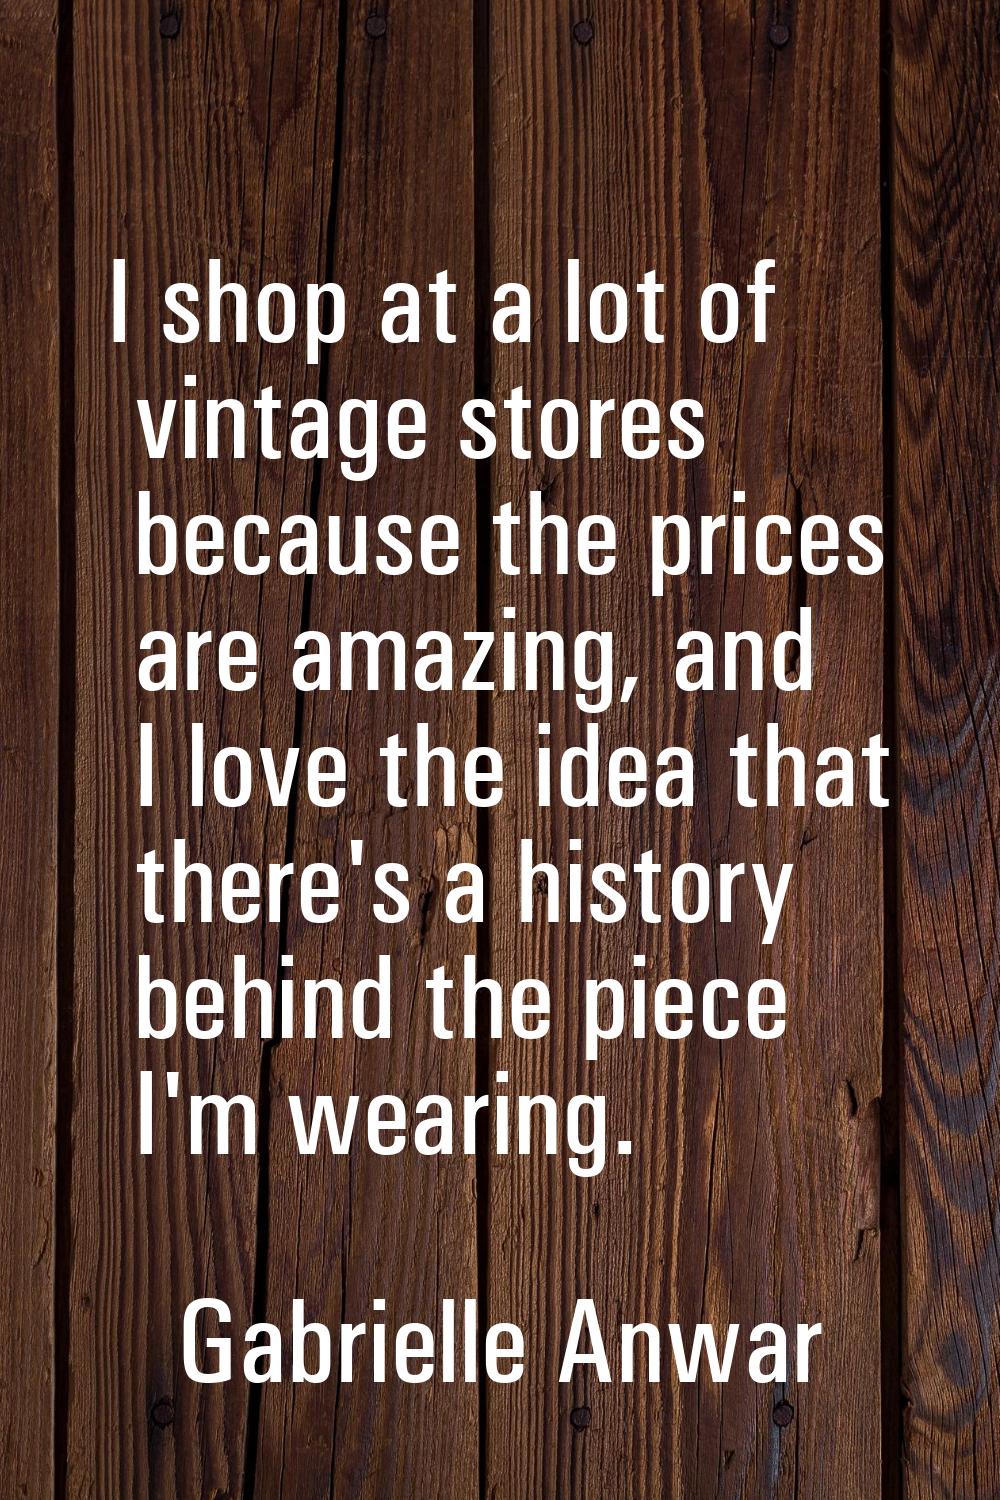 I shop at a lot of vintage stores because the prices are amazing, and I love the idea that there's 